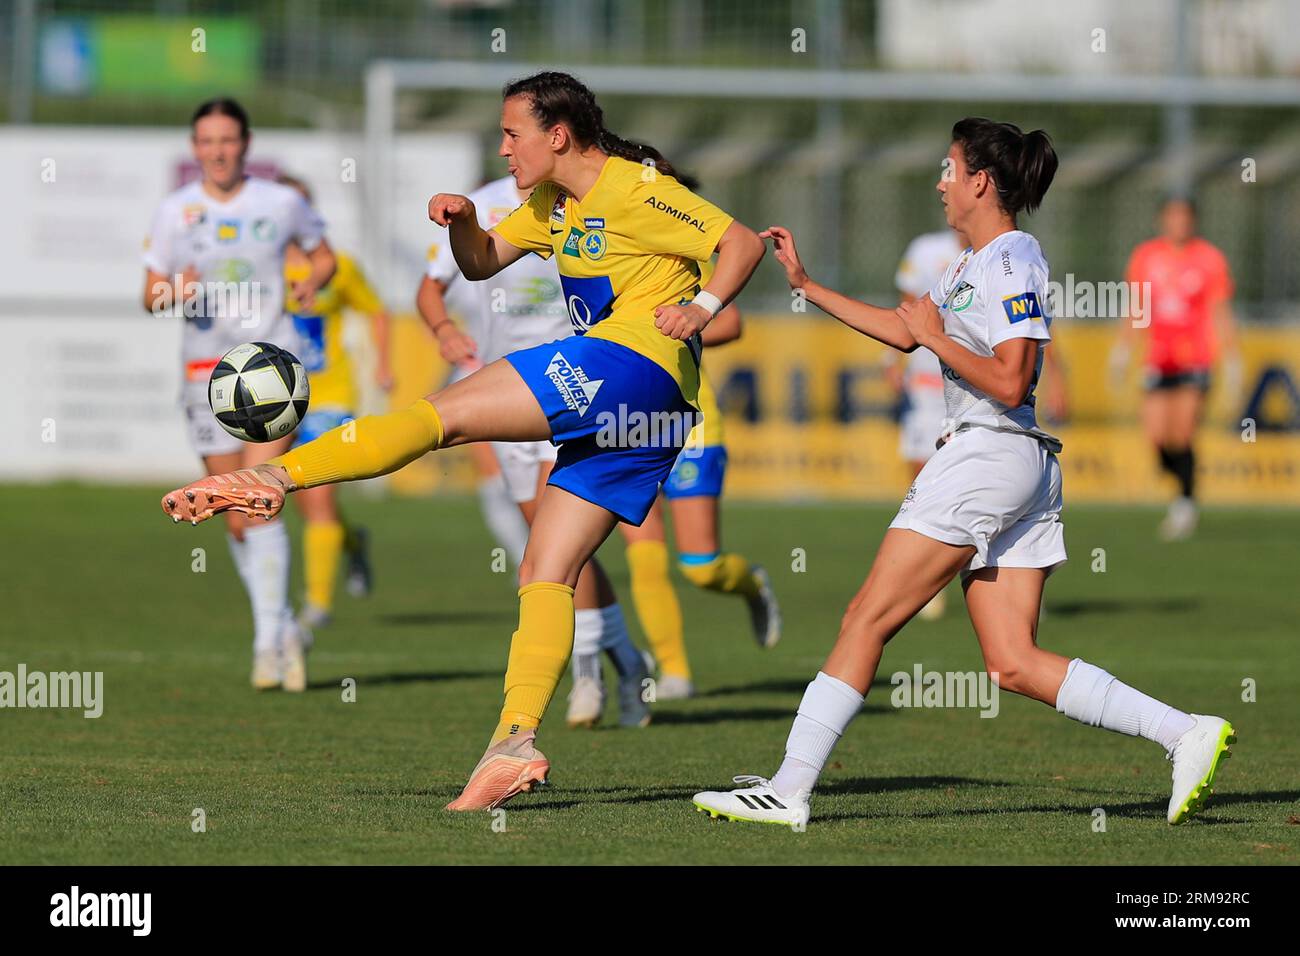 Isabell Schneiderbauer (4 First Vienna FC) clearing the ball during the Admiral Frauen Bundesliga match Neulengbach vs Vienna at Wienerwald Stadion (Tom Seiss/ SPP) Credit: SPP Sport Press Photo. /Alamy Live News Stock Photo